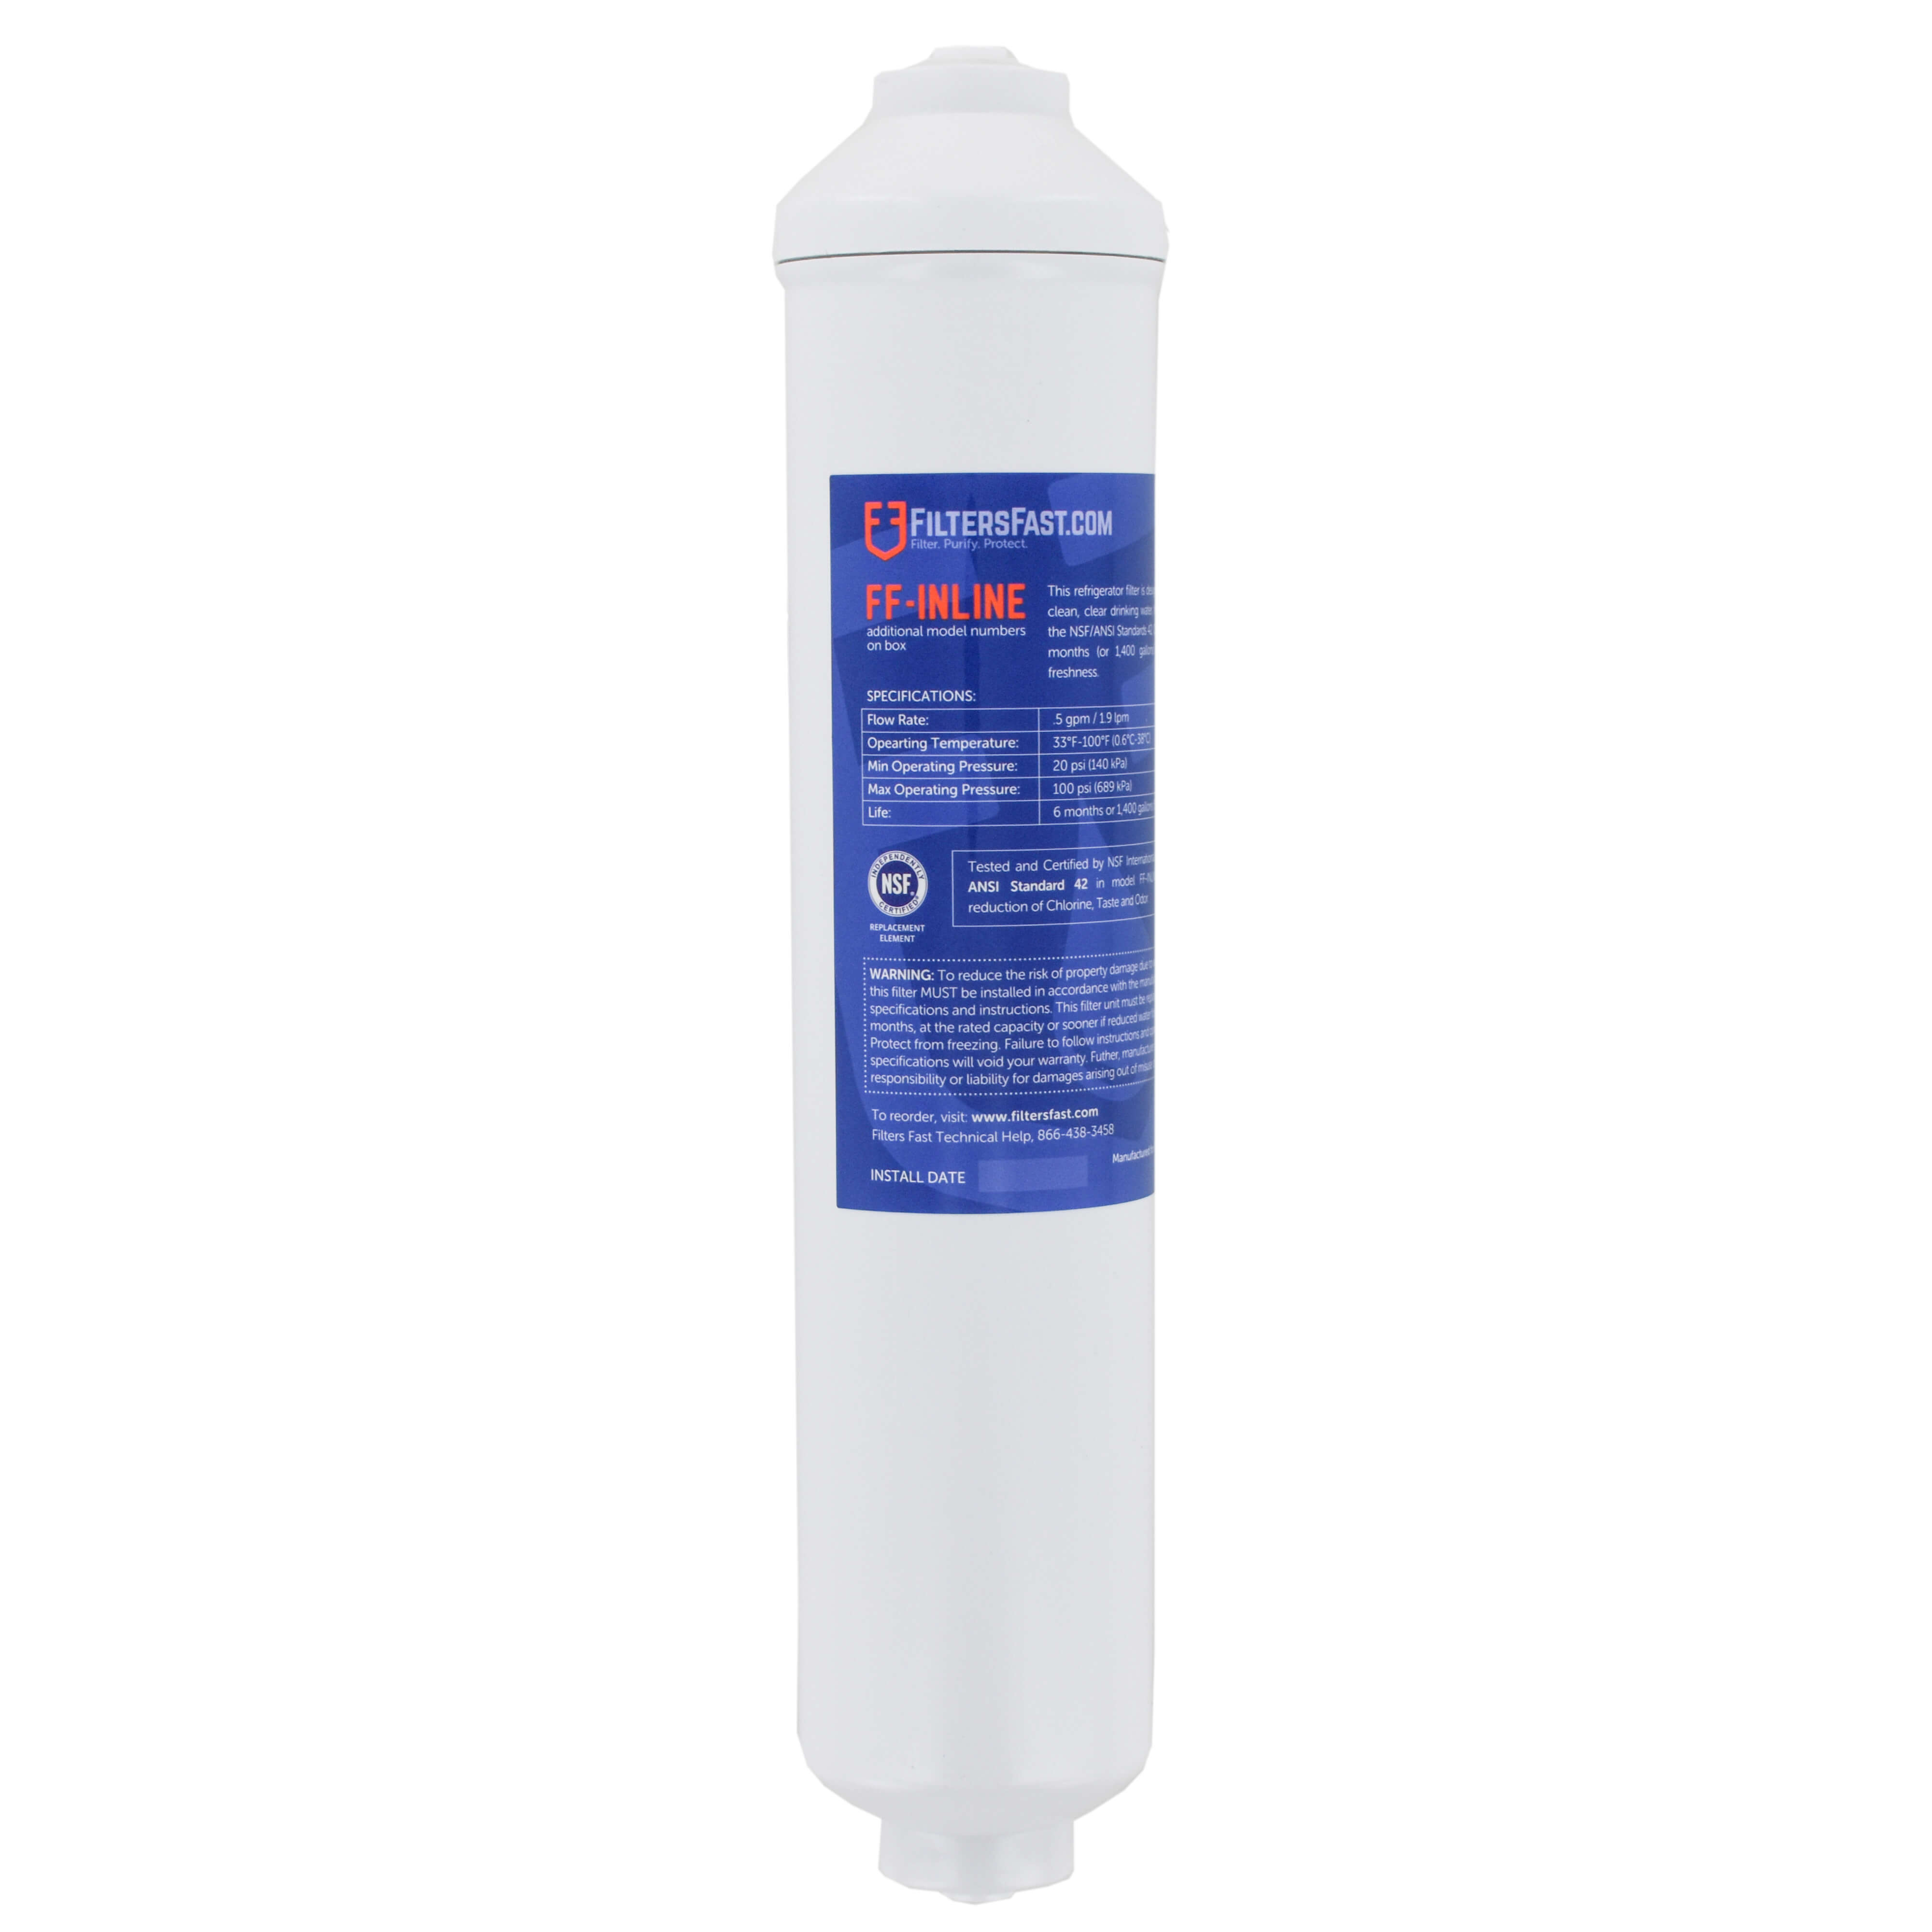 Filters Fast&reg; FF-INLINE Replacement for Water Sentinel WSI-2